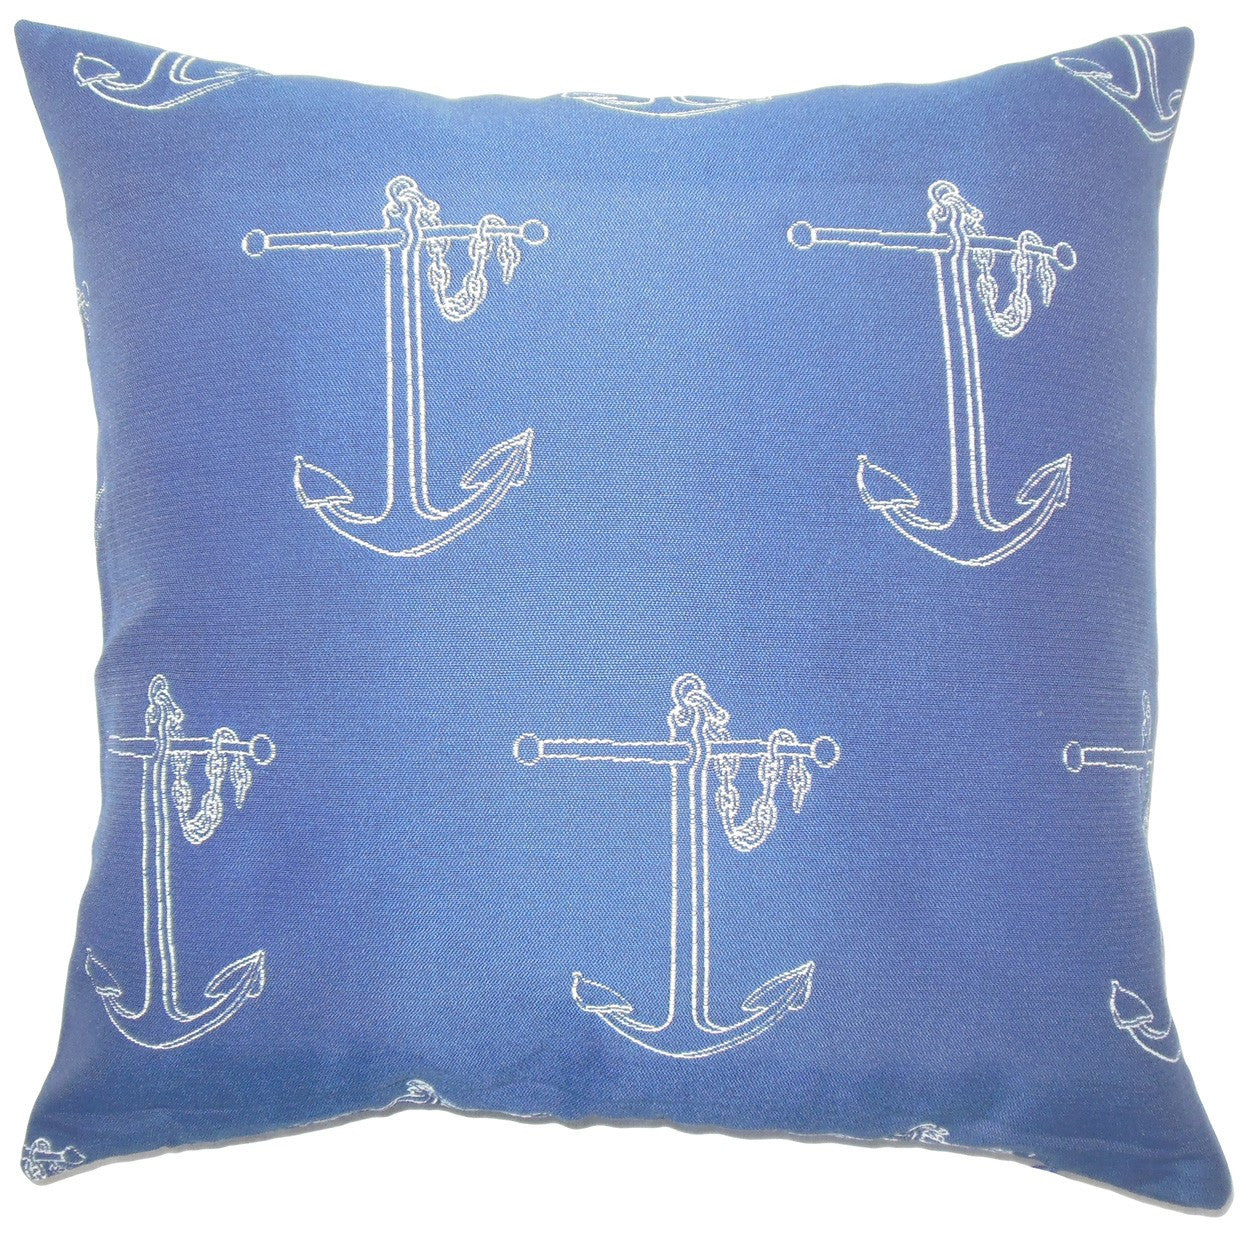 Wies Graphic Pillow Blue